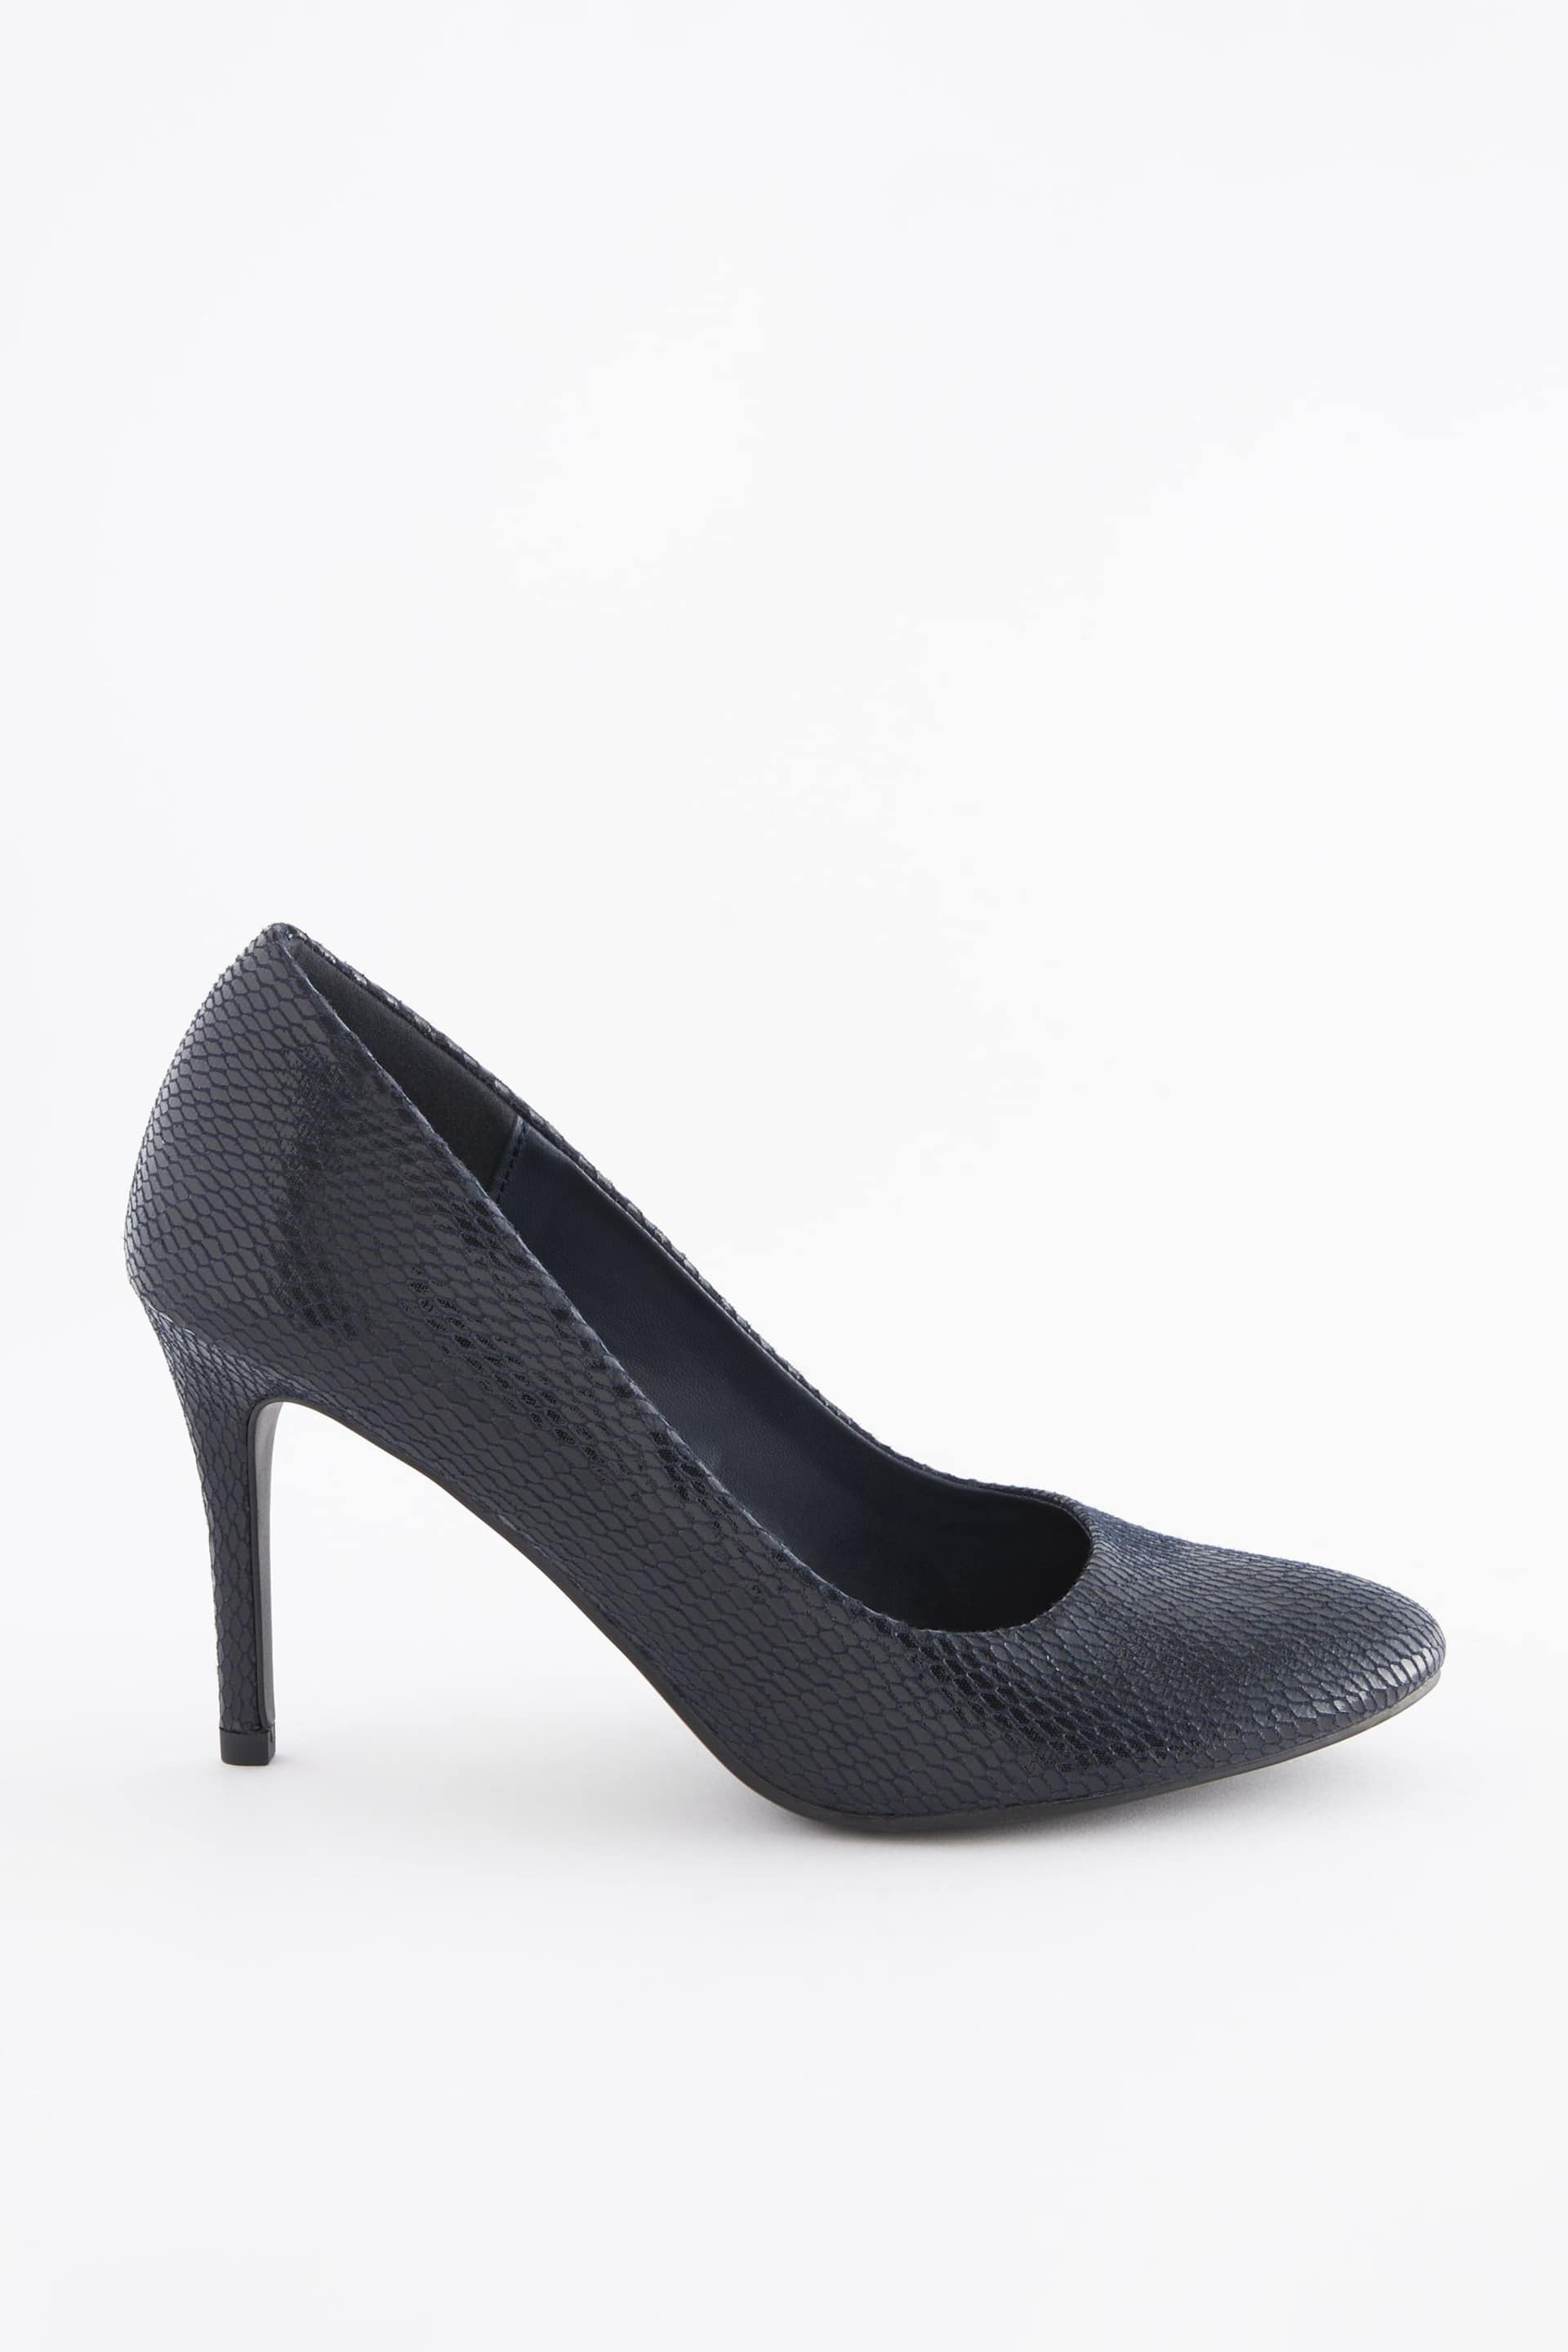 Navy Blue Extra Wide Fit Forever Comfort® Round Toe Court Shoes - Image 4 of 7